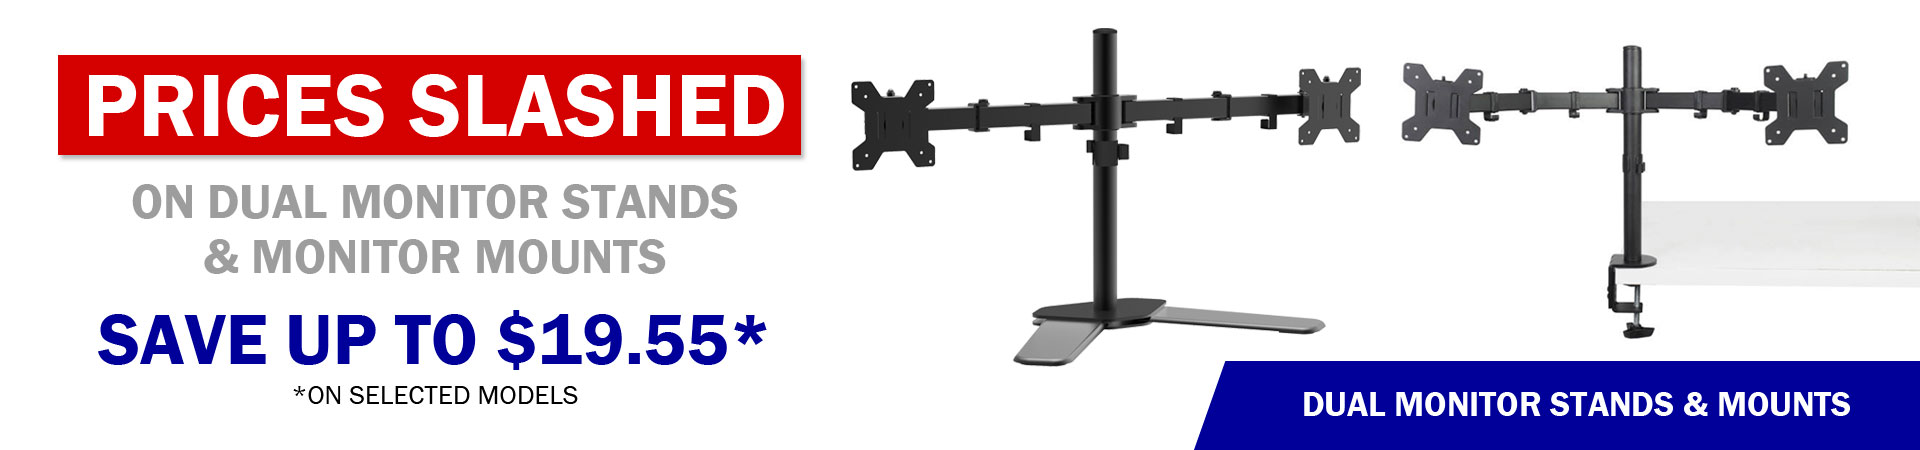 We’ve dropped the price on our dual monitor desktop stands and mounts even further